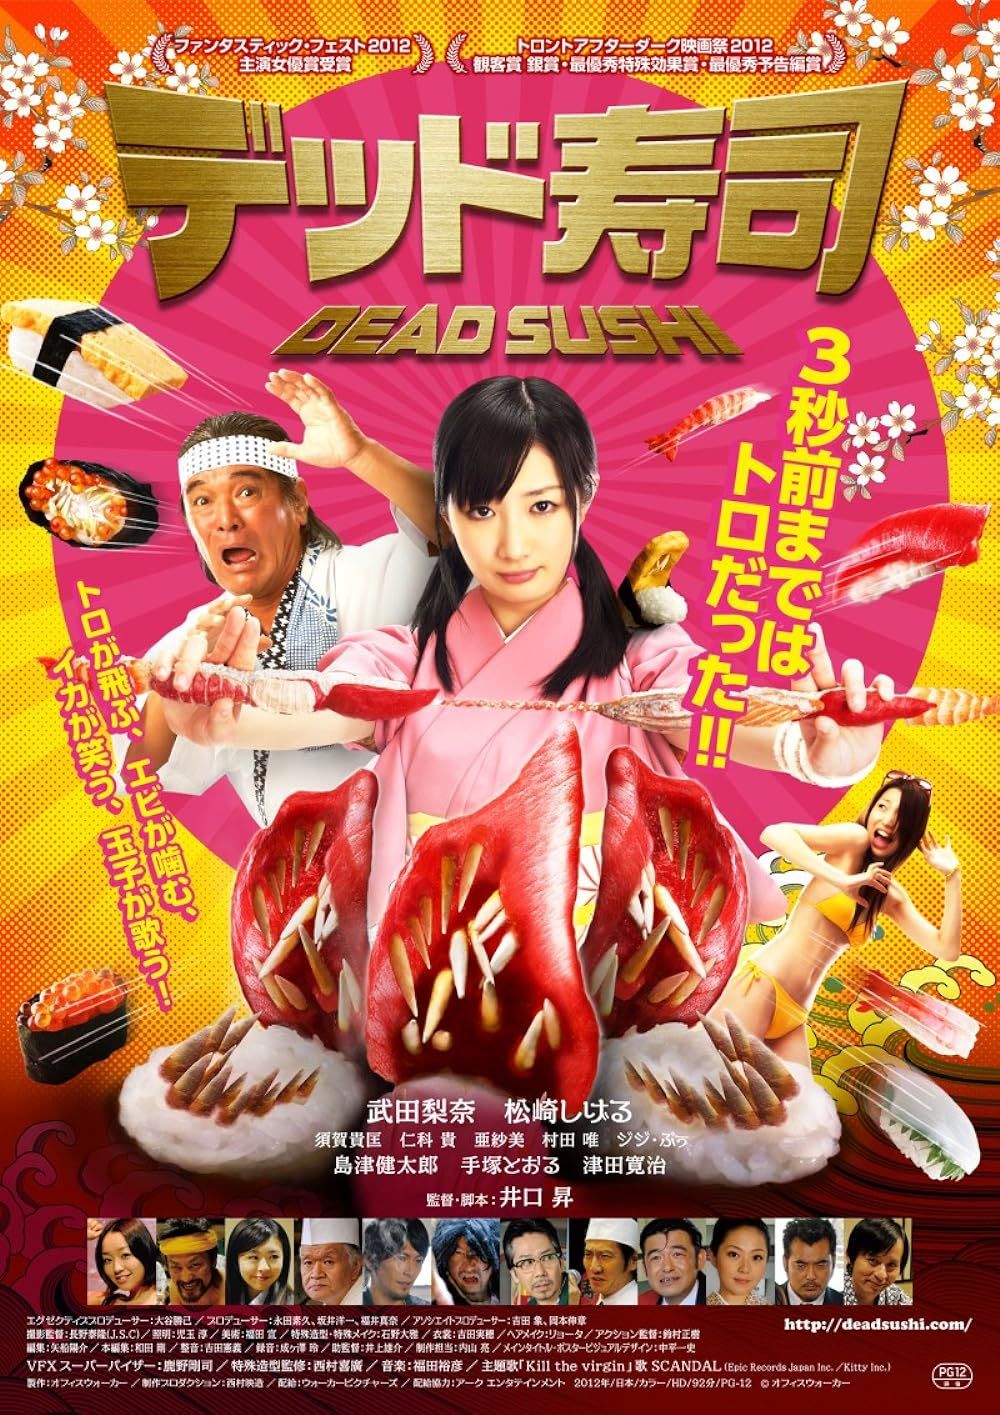 The Cast on the Dead Sushi Poster